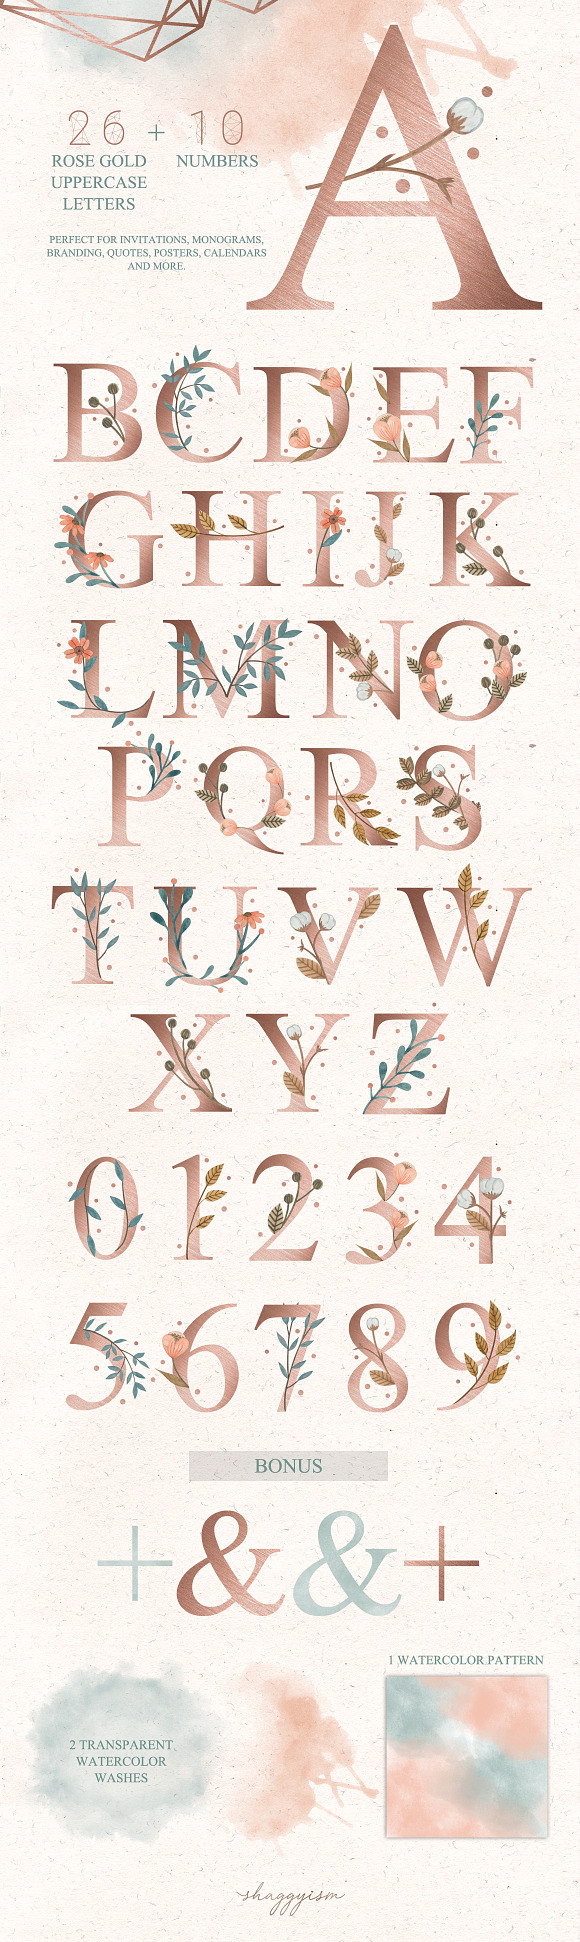 Rose Gold Alphabets in Illustrations - product preview 1